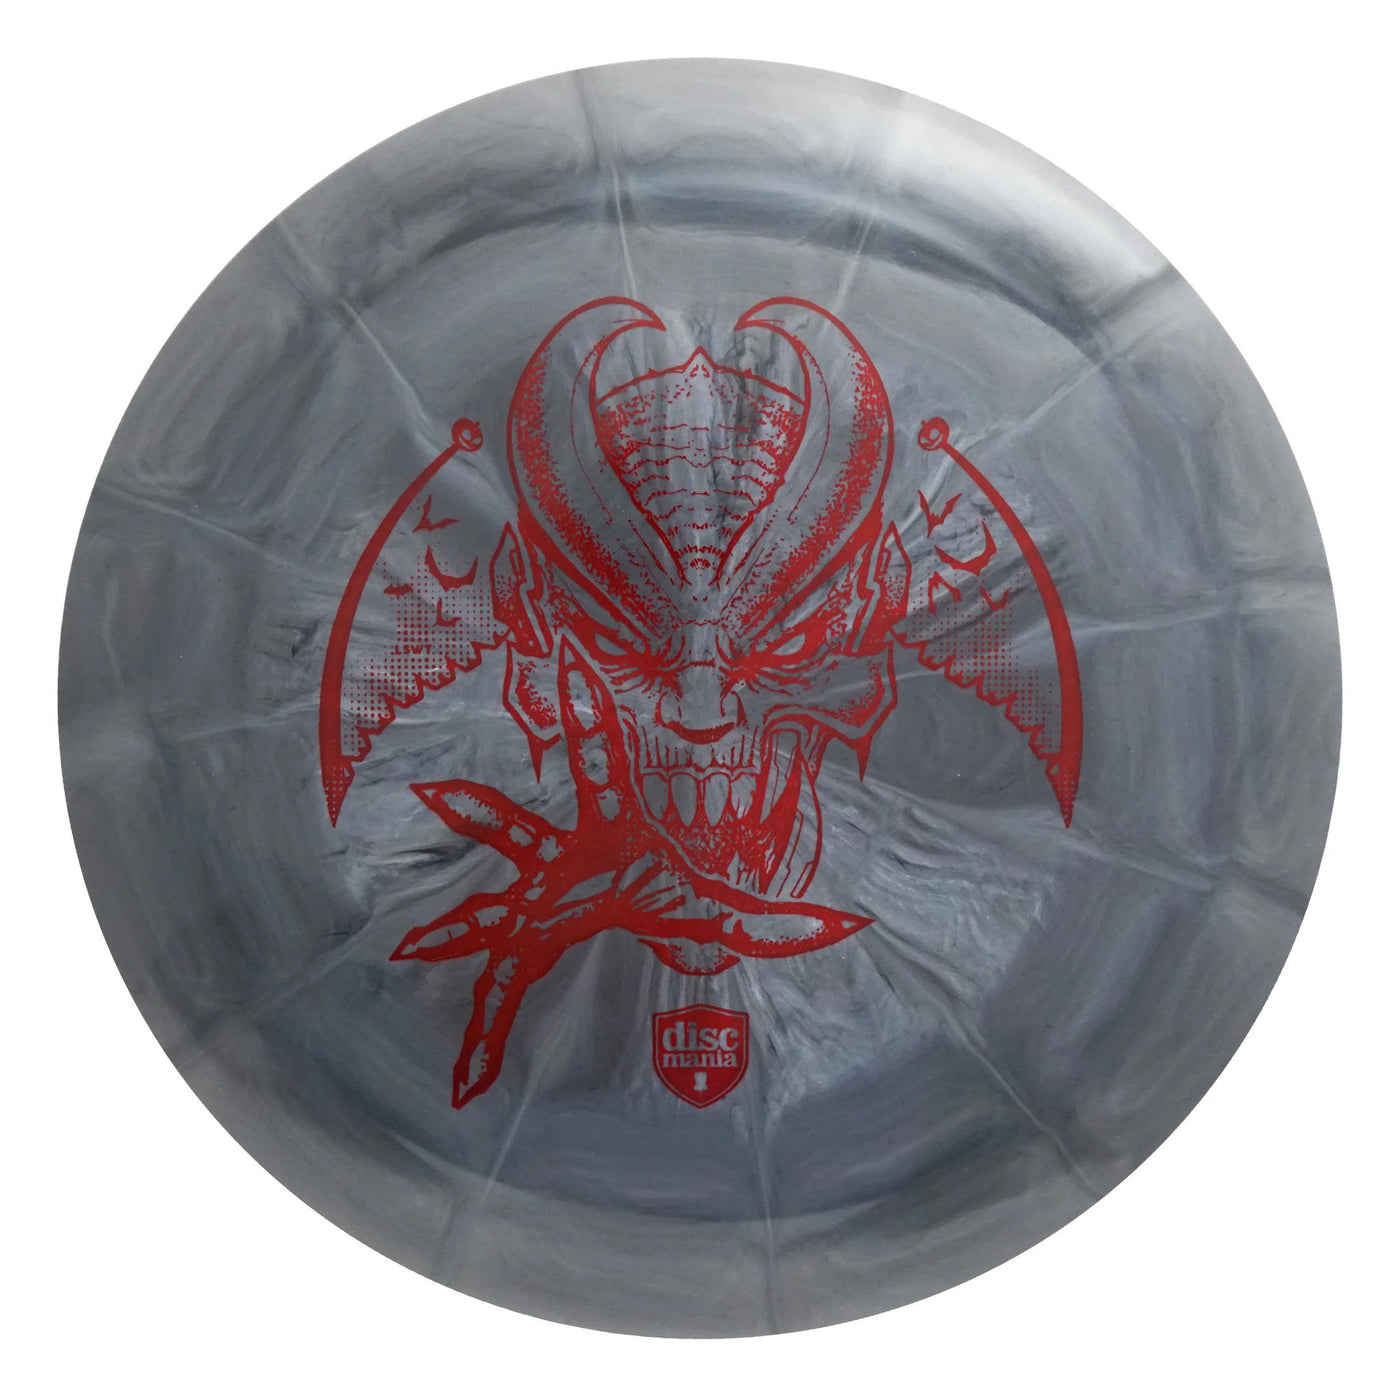 Discmania Lux Vapor Paradigm Distance Driver with Limited Edition Les White Zombie Gremlin Stamp - Speed 12